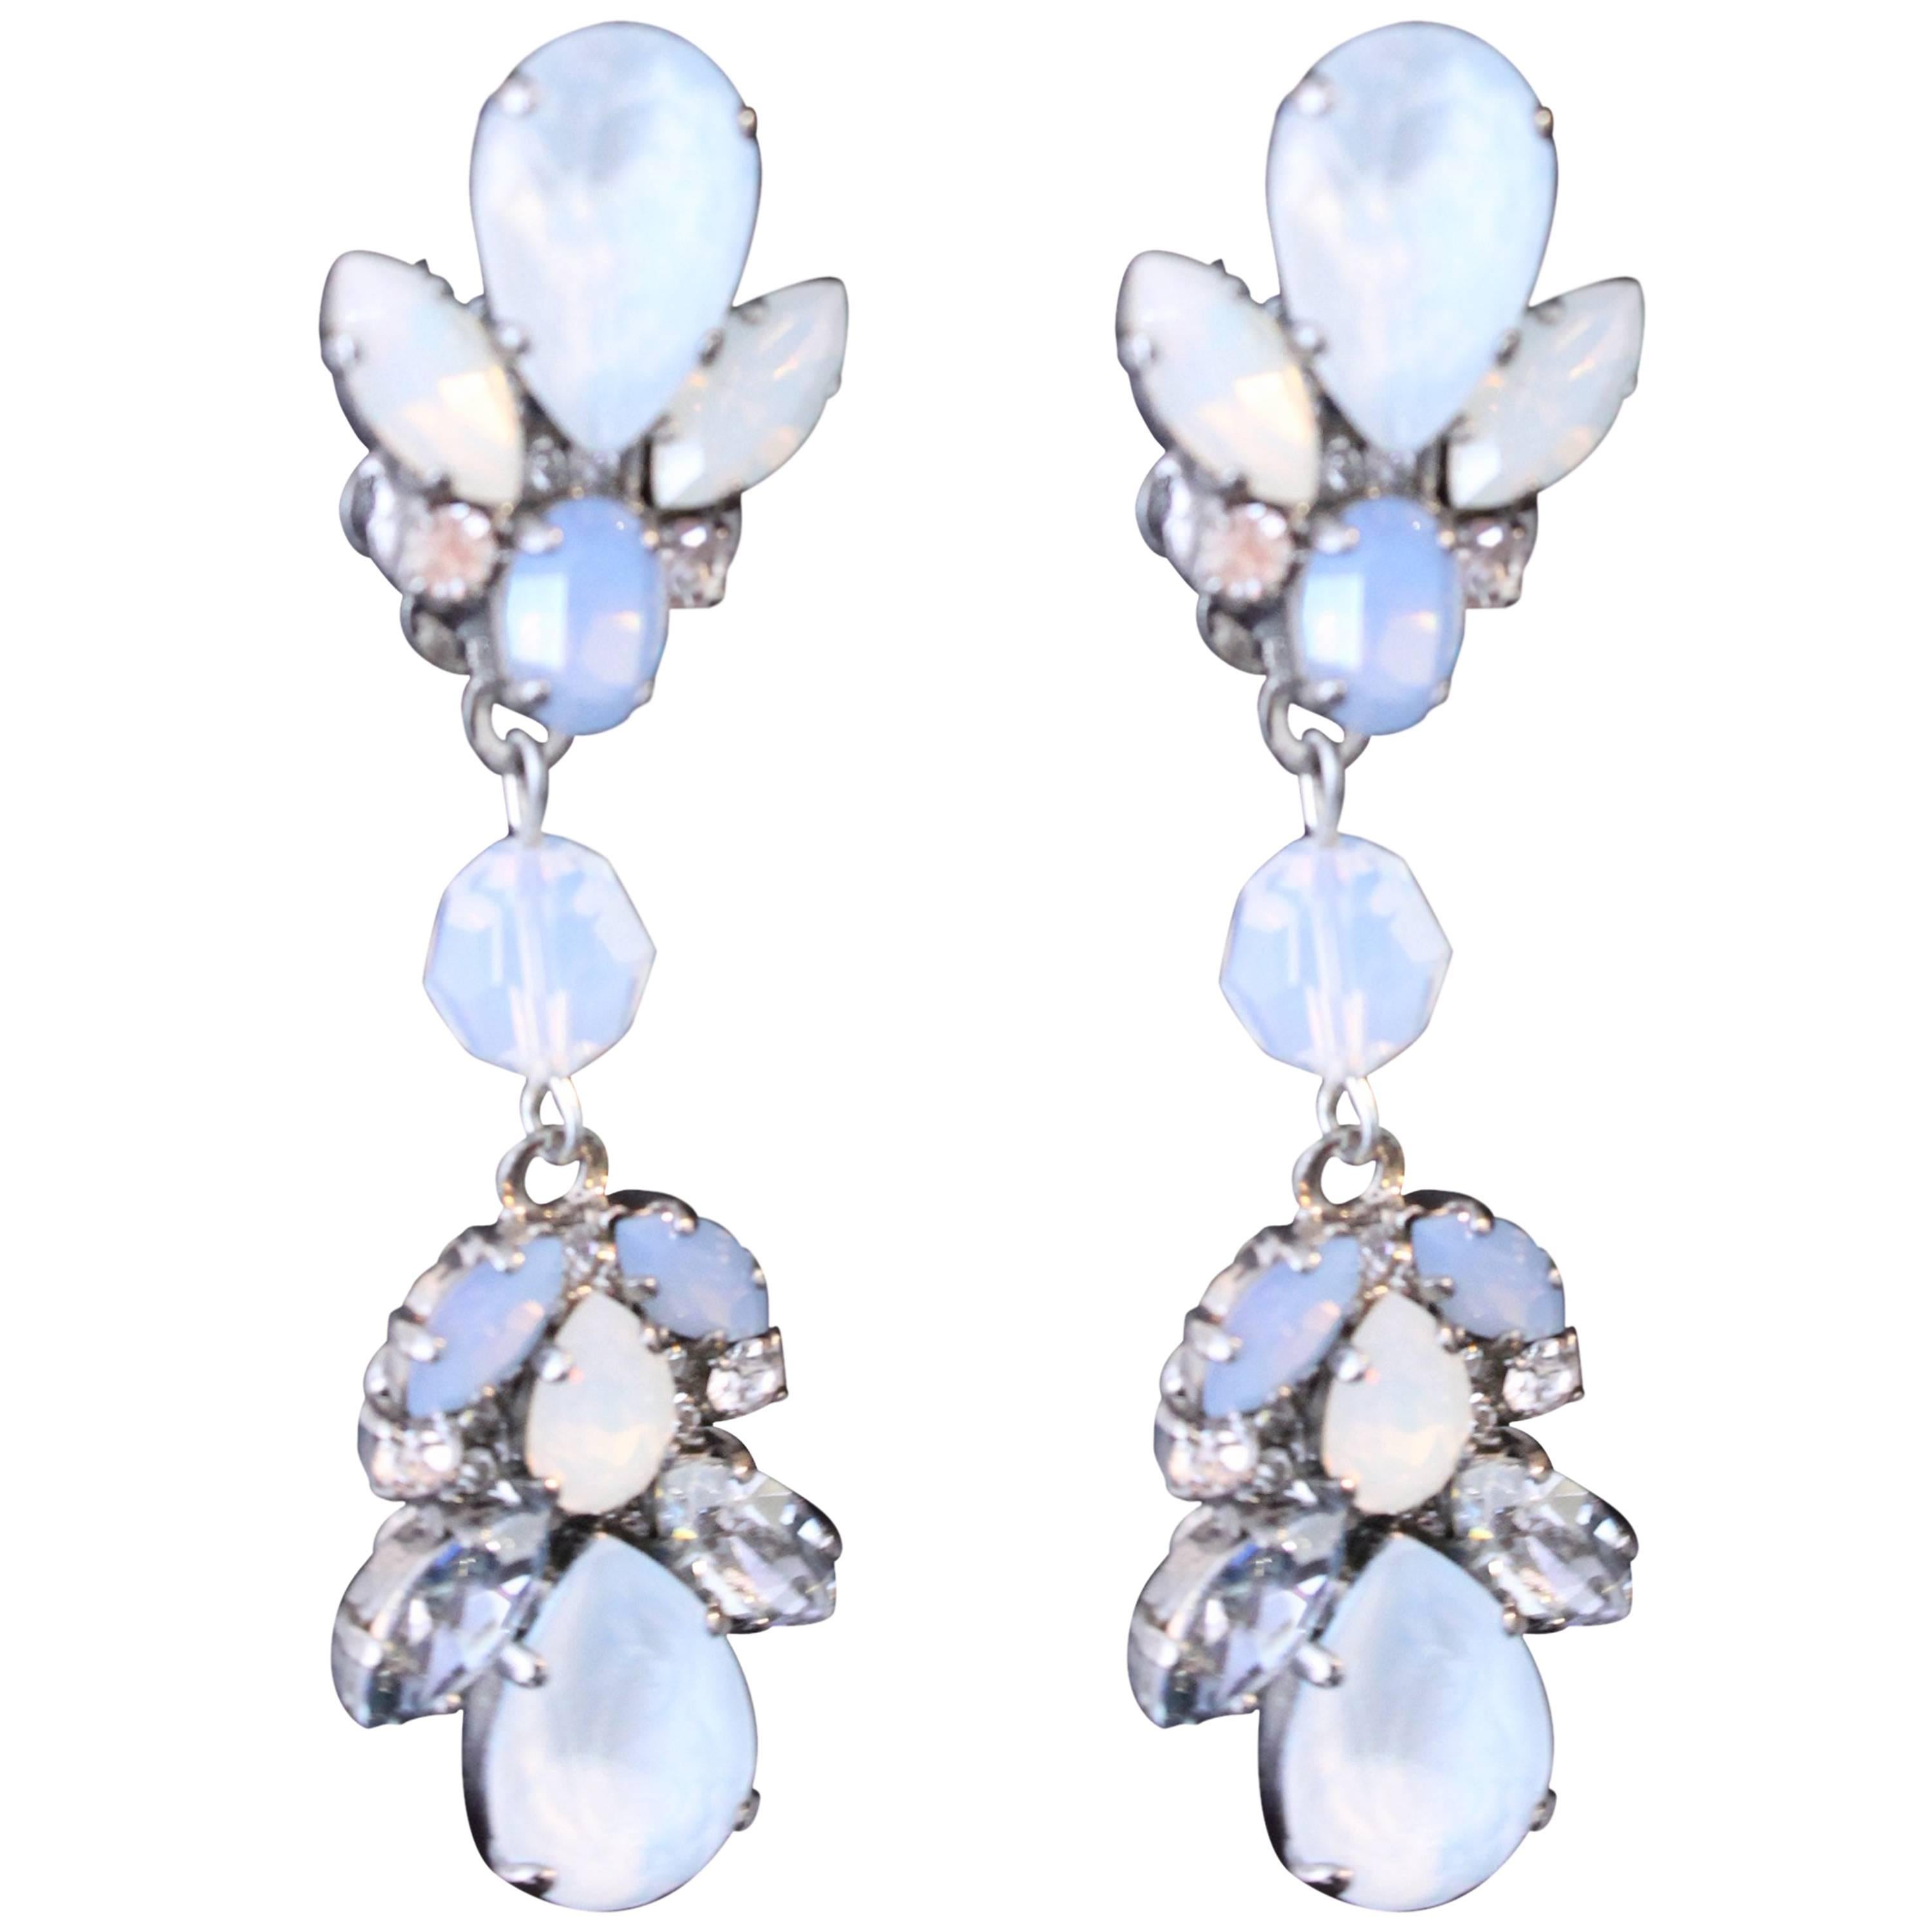 Ice Blue, White and Silver Swarovski Crystal Statement Earrings